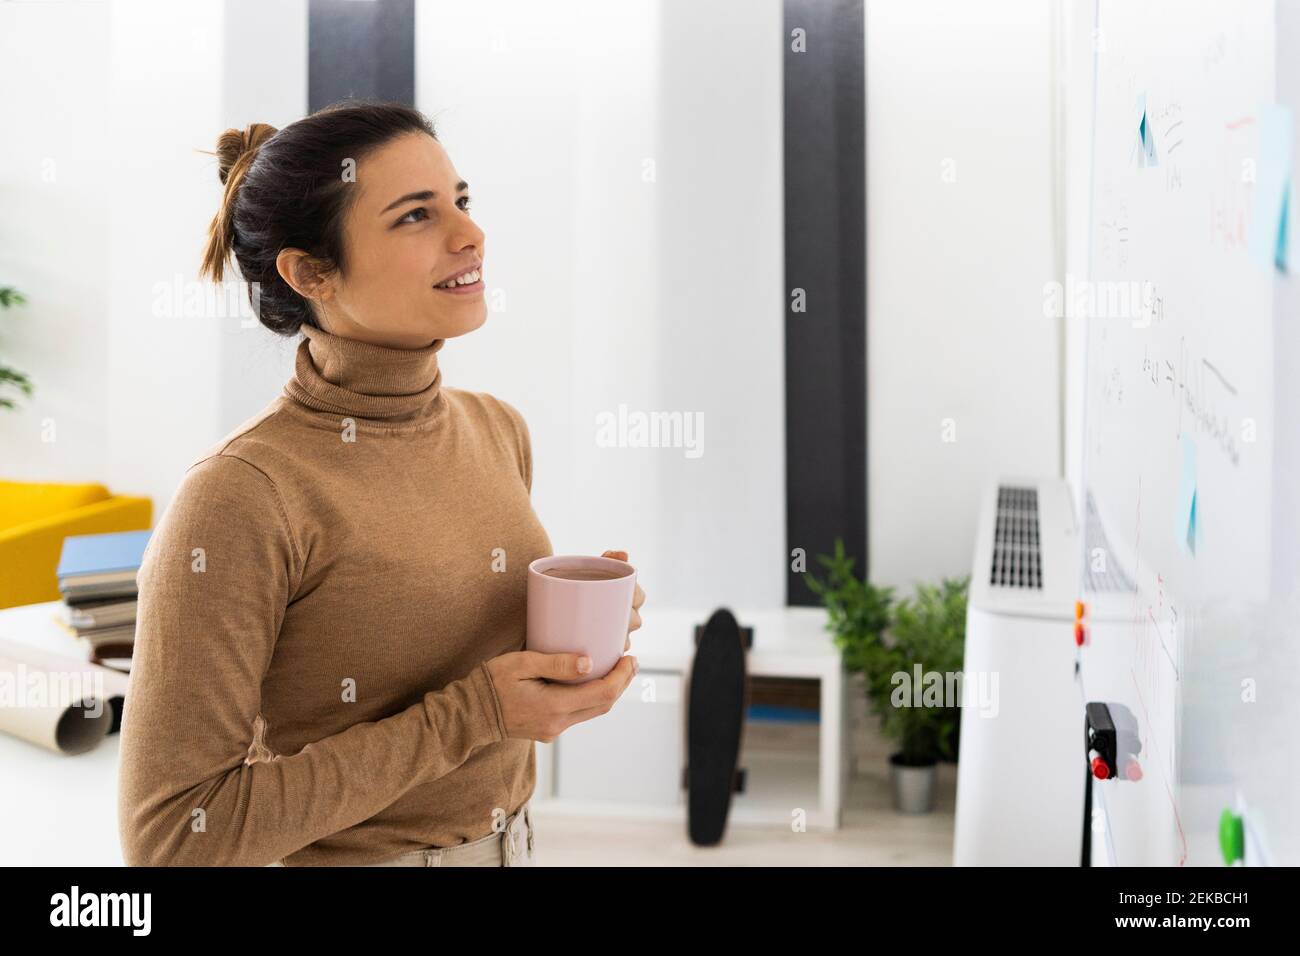 Woman with coffee cup looking at mathematical formula on board Stock Photo